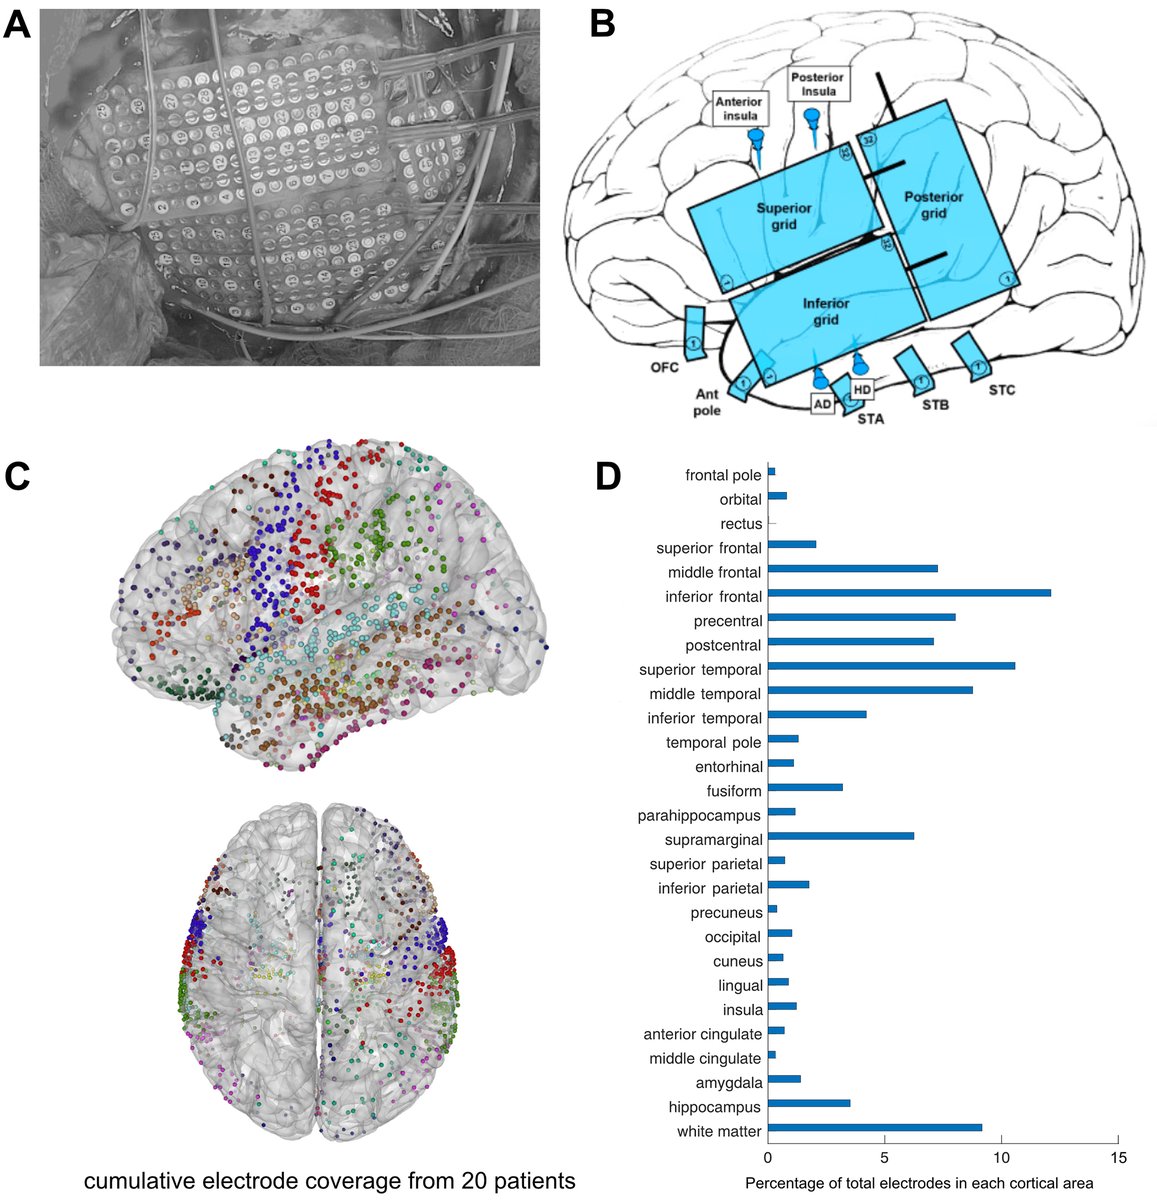 #OnlineFirst: Modern intracranial electroencephalography for epilepsy localization with combined subdural grid and depth electrodes with low and improved hemorrhagic complication rates thejns.org/view/journals/…